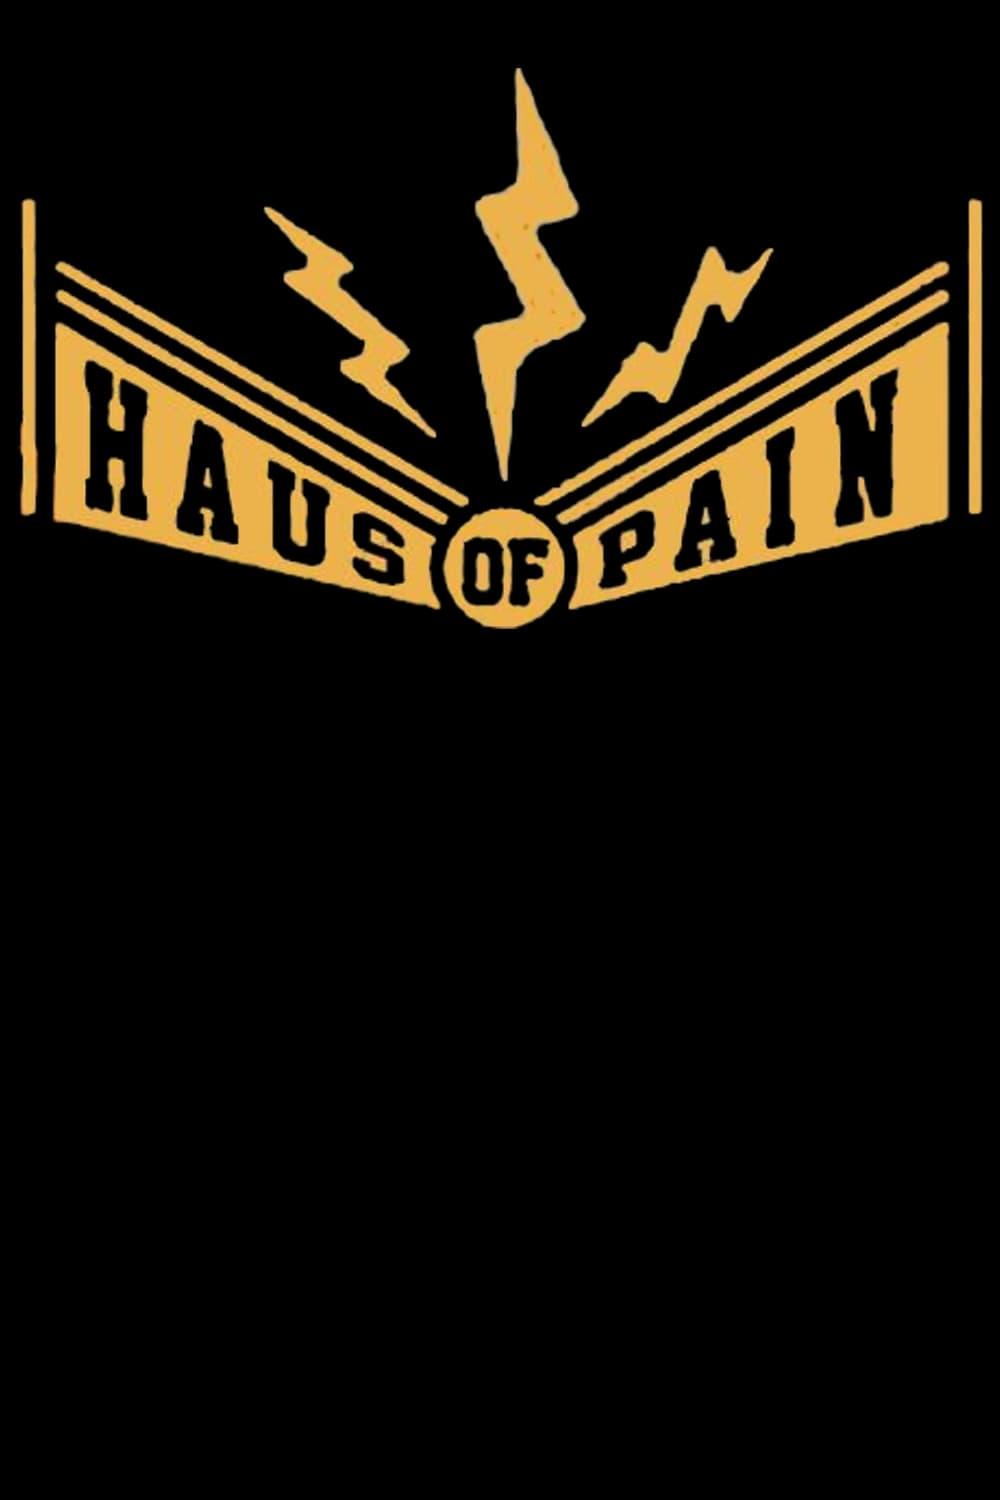 Haus of Pain poster